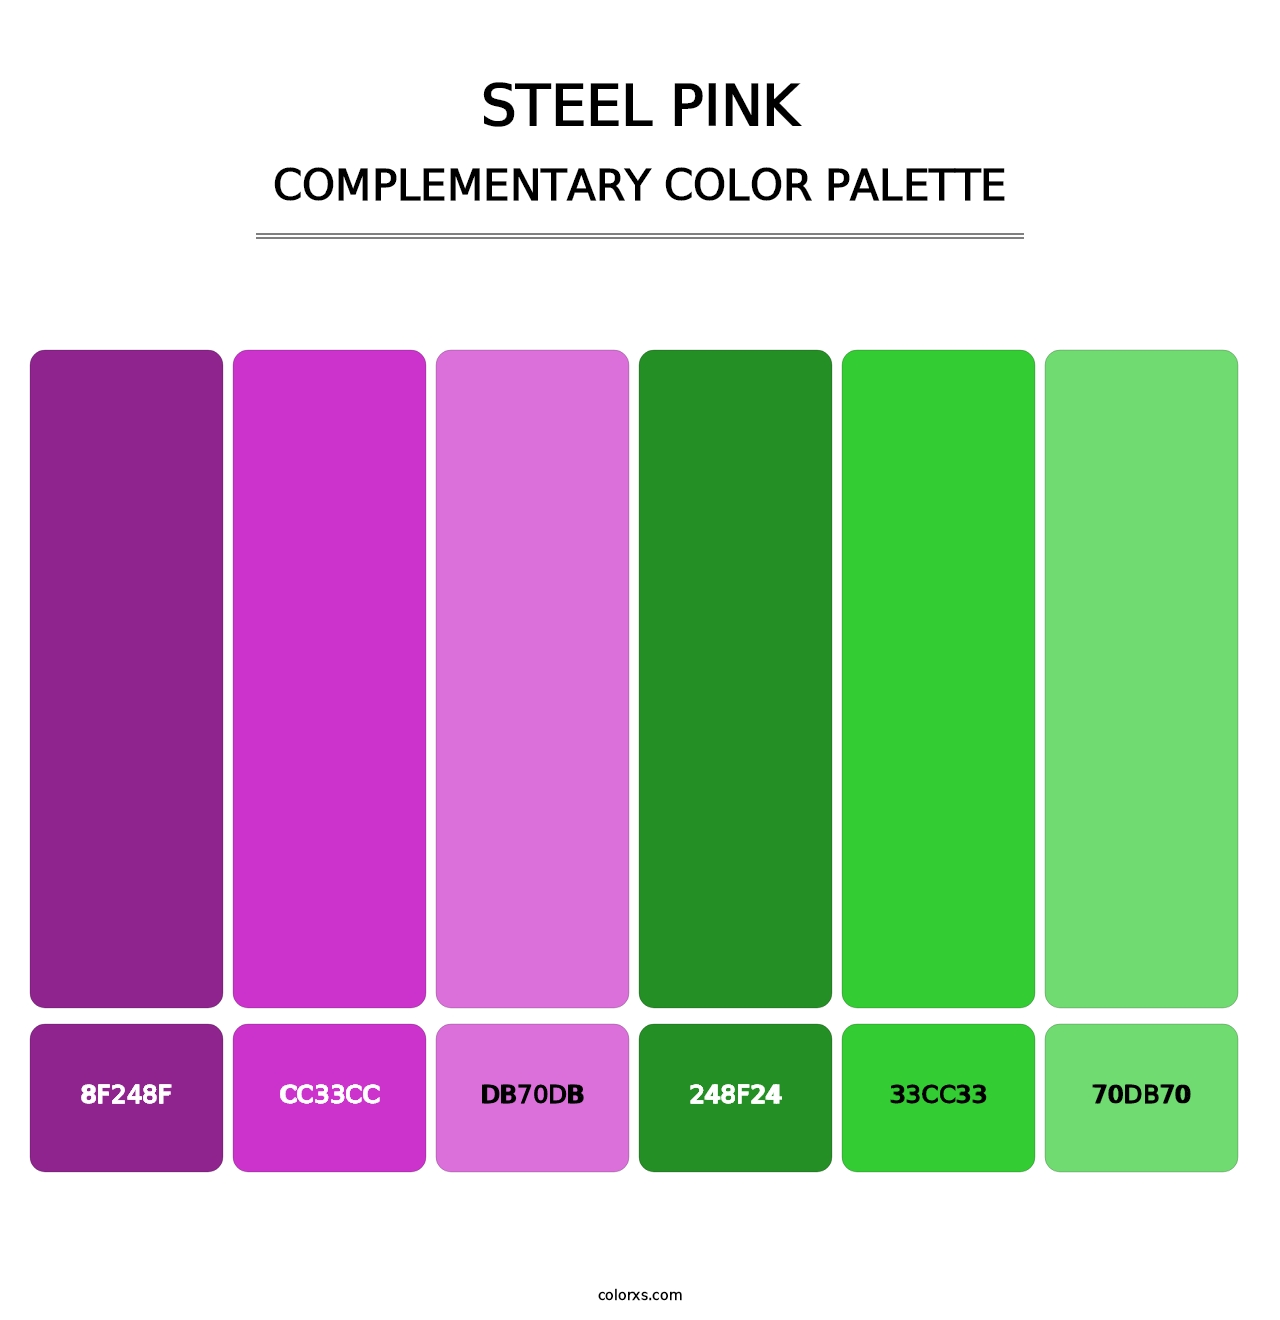 Steel Pink - Complementary Color Palette